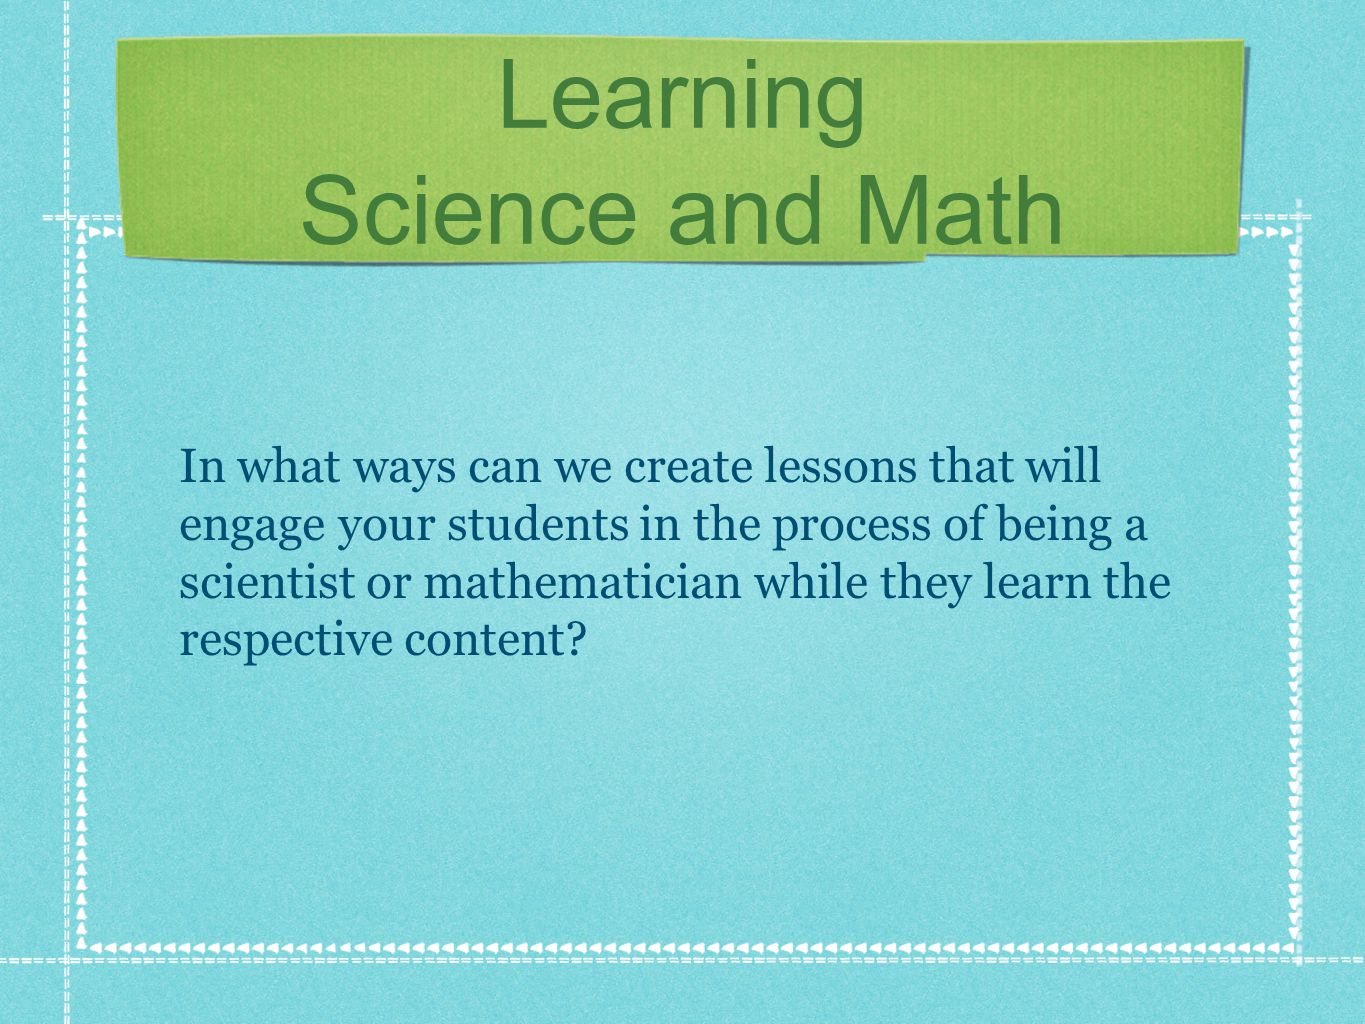 Learning Science and Math In what ways can we create lessons that will engage your students in the process of being a scientist or mathematician while they learn the respective content